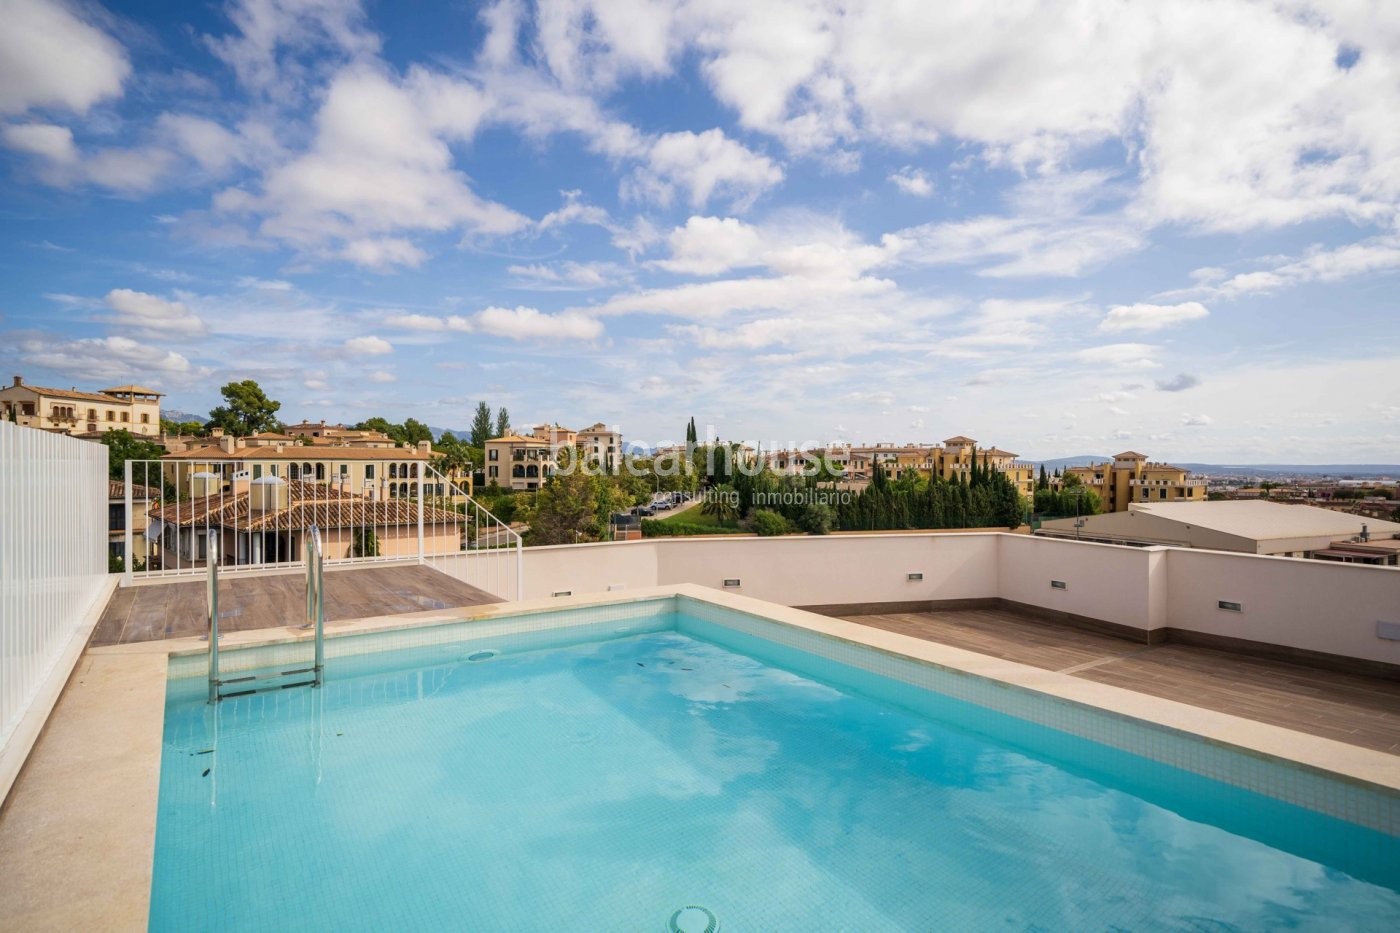 Living surrounded by golf, nature and high qualities in Palma.